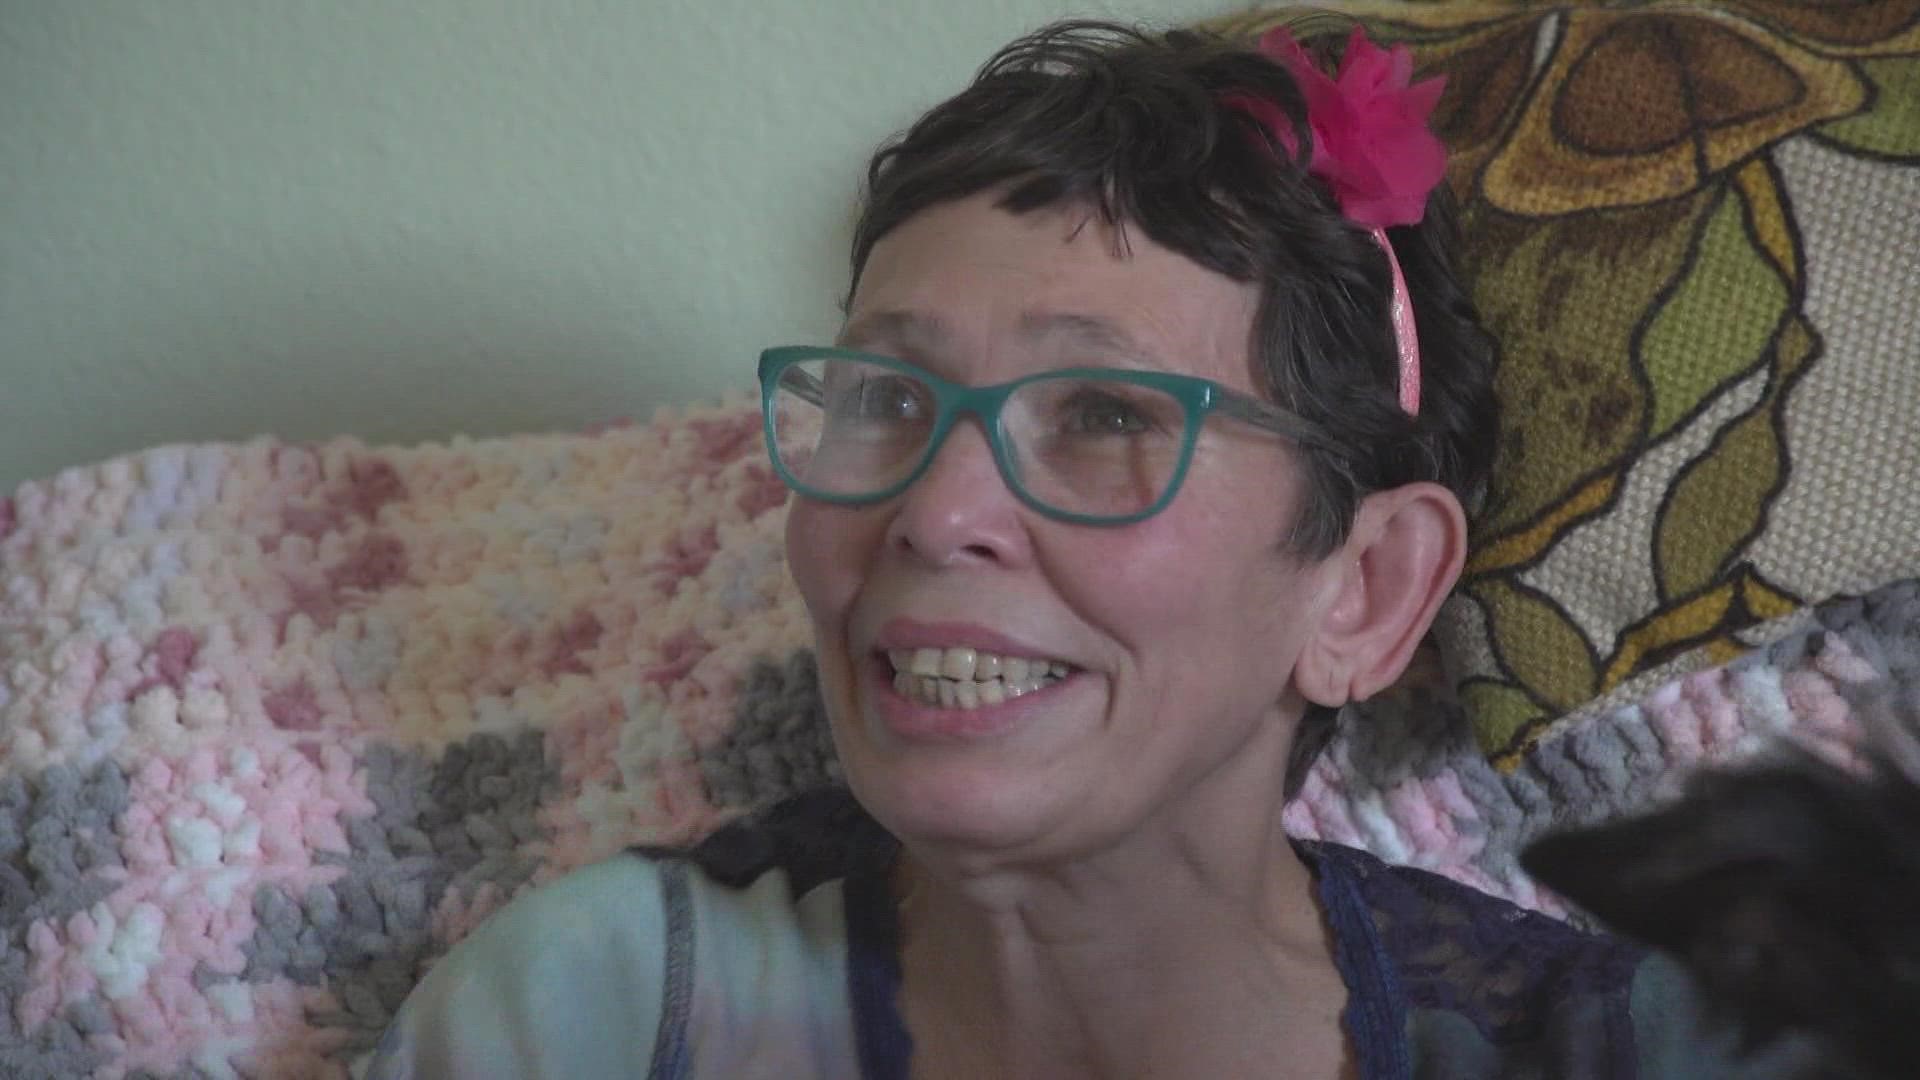 Her life changed forever thanks to DNA test that reunited her with her long-lost family.